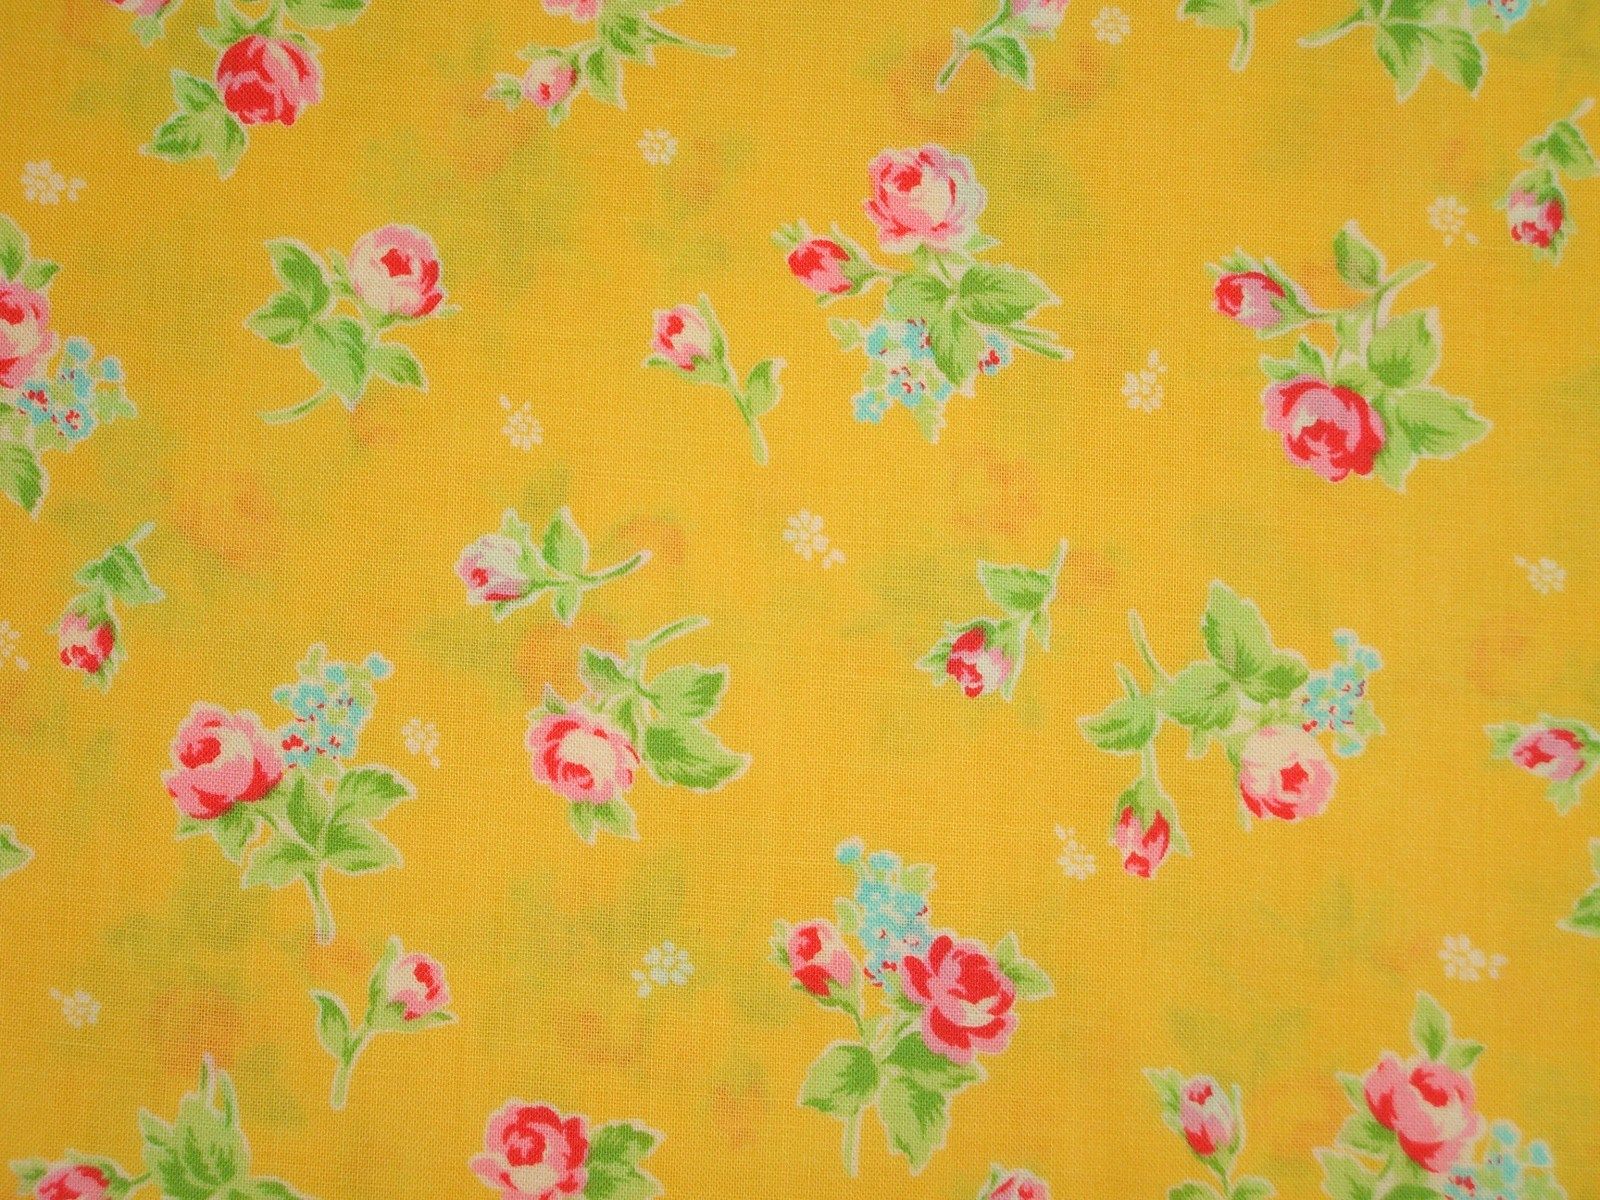 Flower Sugar cotton fabric by Lecien 30749-50 Roses on Yellow